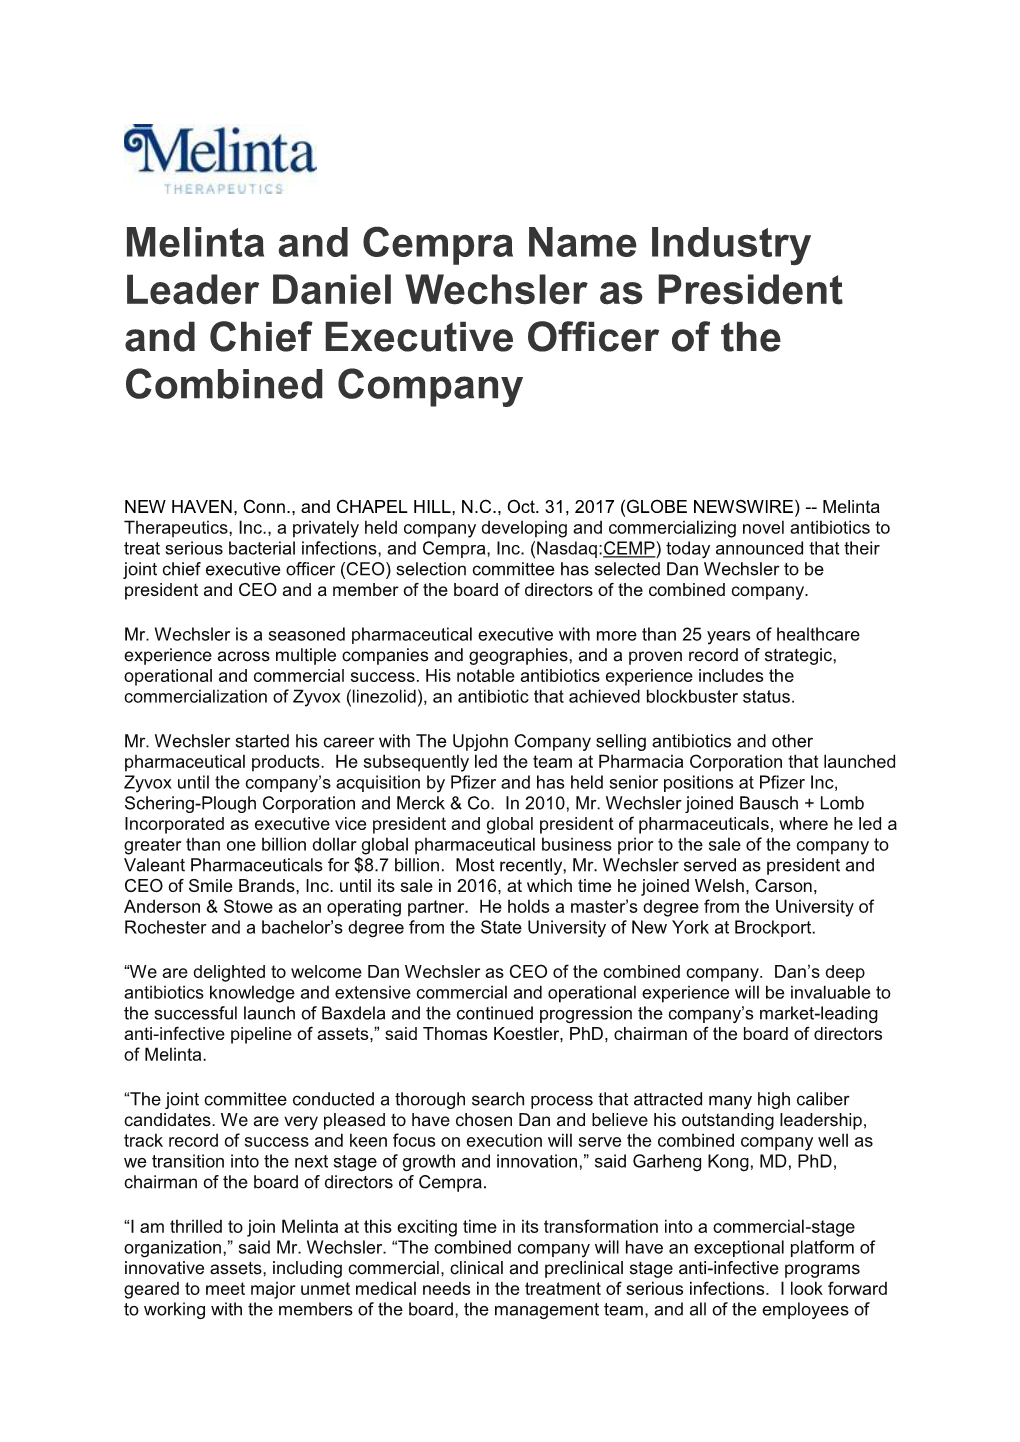 Melinta and Cempra Name Industry Leader Daniel Wechsler As President and Chief Executive Officer of the Combined Company